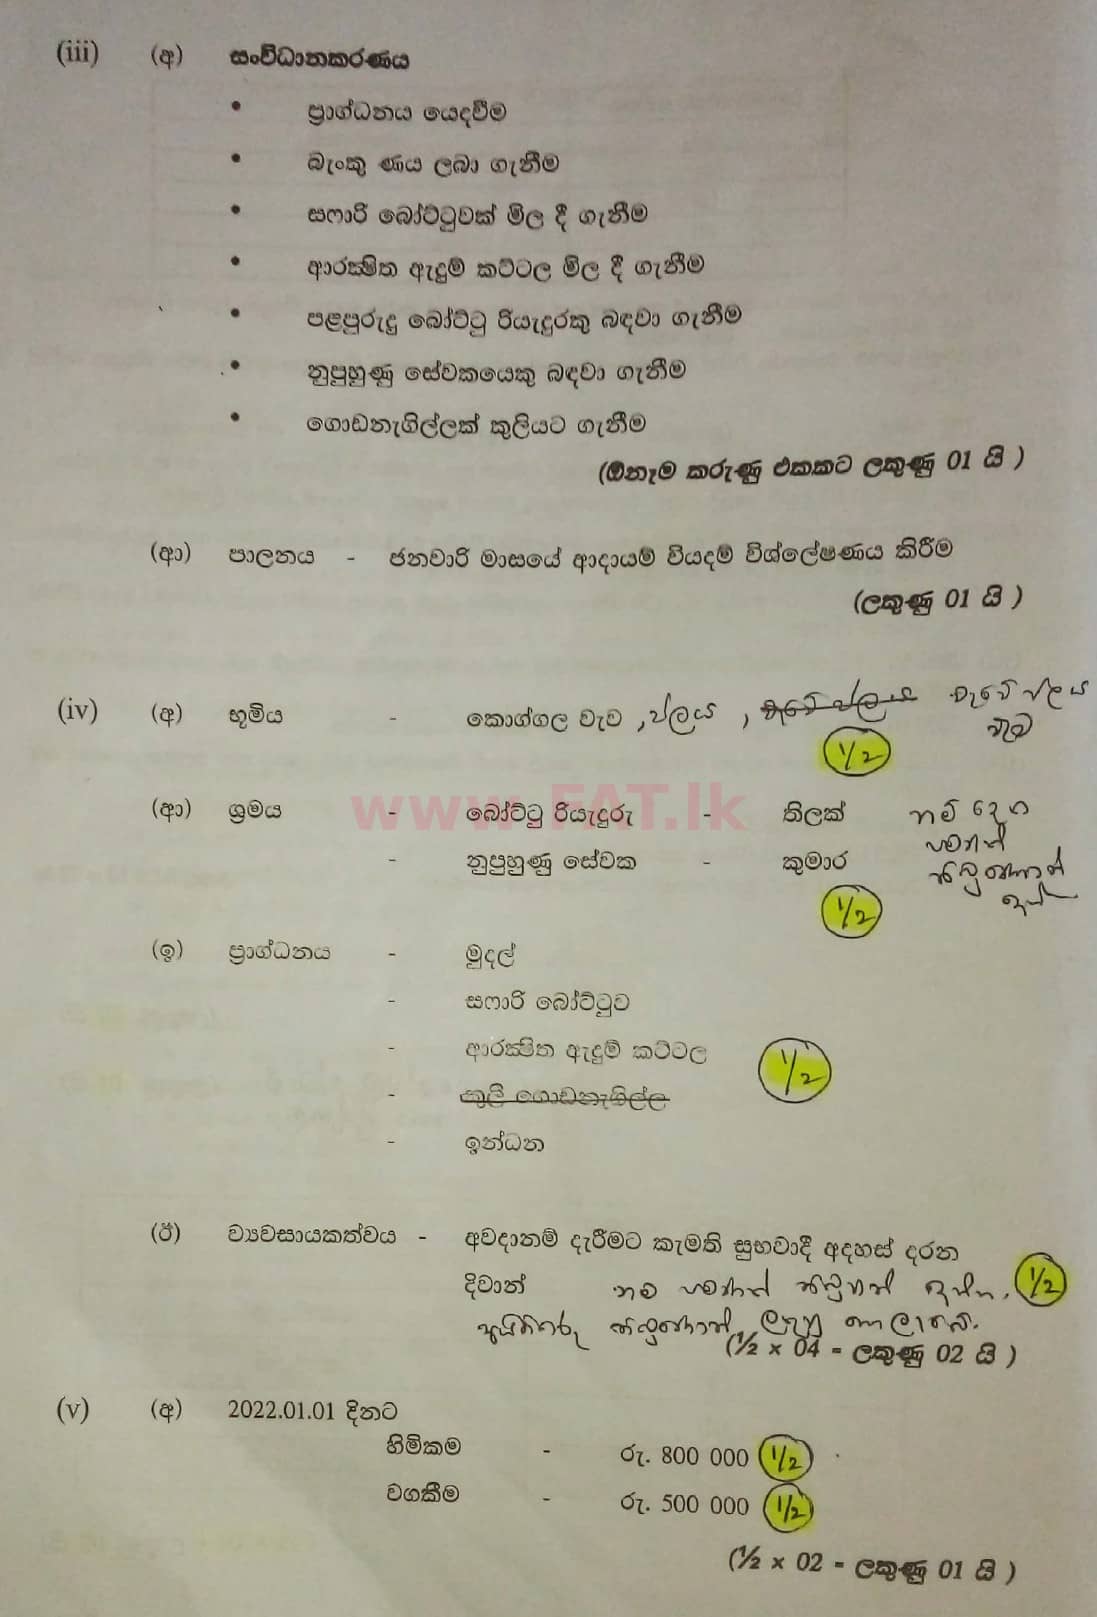 National Syllabus : Ordinary Level (O/L) Business and Accounting Studies - 2021 May - Paper II (සිංහල Medium) 1 5811